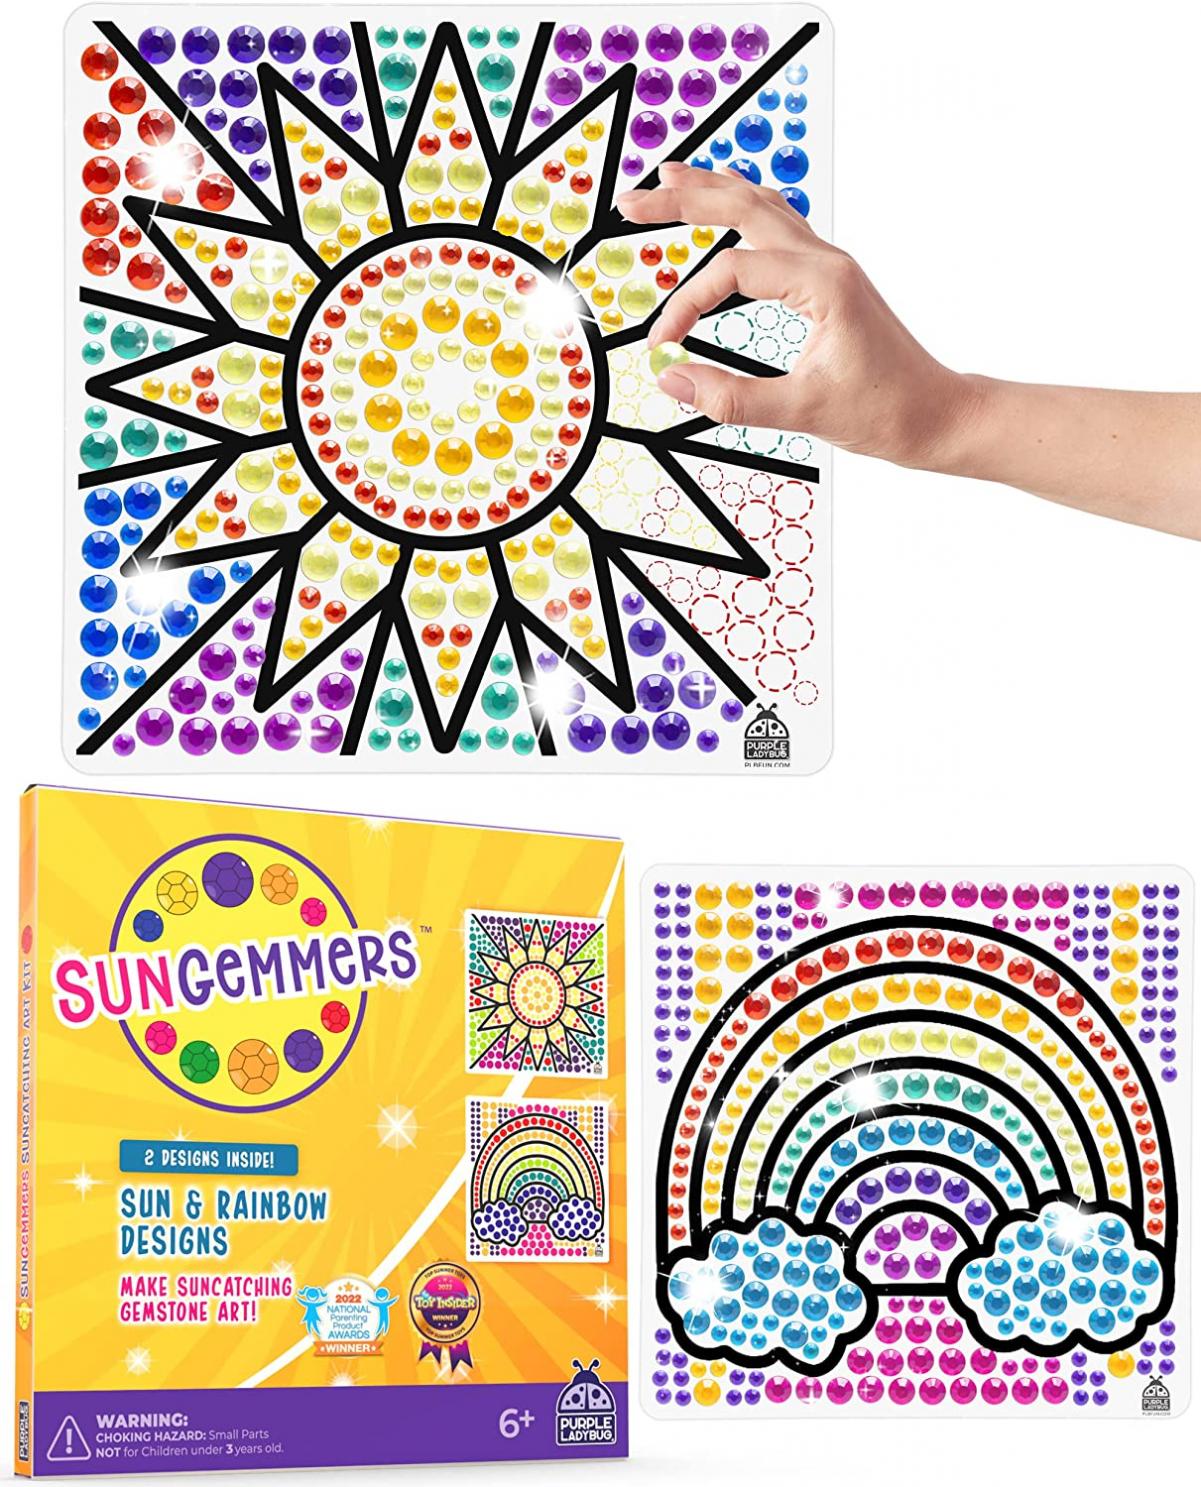 SUNGEMMERS Big Diamond Gem Art for Kids Suncatcher Kits for Kids - Arts and Crafts for Girls Ages 6-8, Gifts for 7 Year Old Girls, Christmas Gifts for 5 Year Old Girls, & Girl Stocking Stuffers 7-10